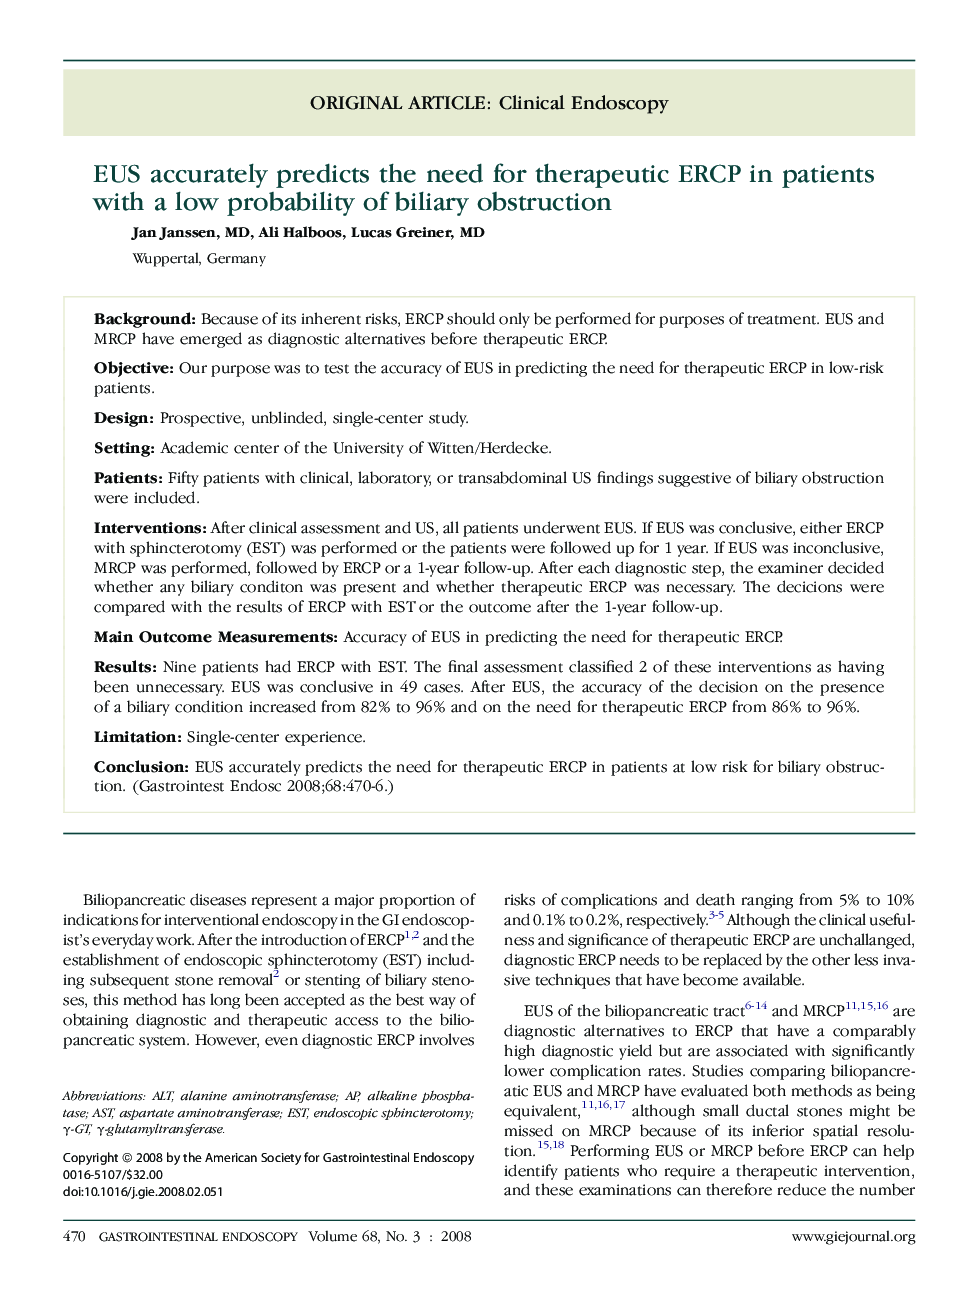 EUS accurately predicts the need for therapeutic ERCP in patients with a low probability of biliary obstruction